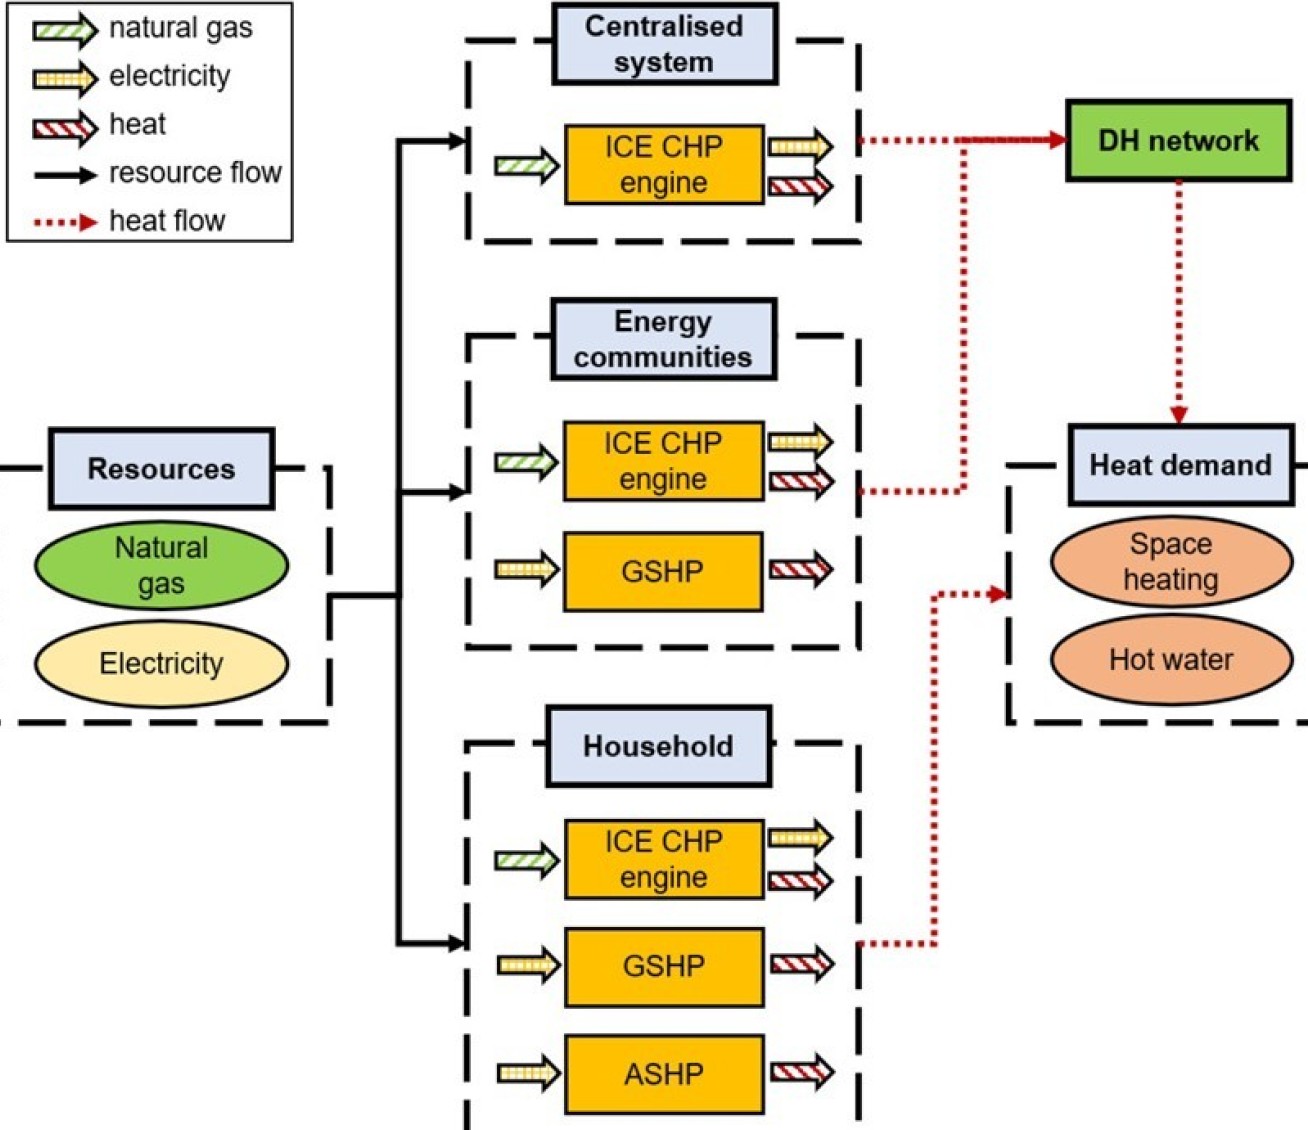 Pathways including air-source heat pumps (ASHPs), ground-source heat pumps (GSHPs) and combined heat and power (CHP) systems for the provision of heat